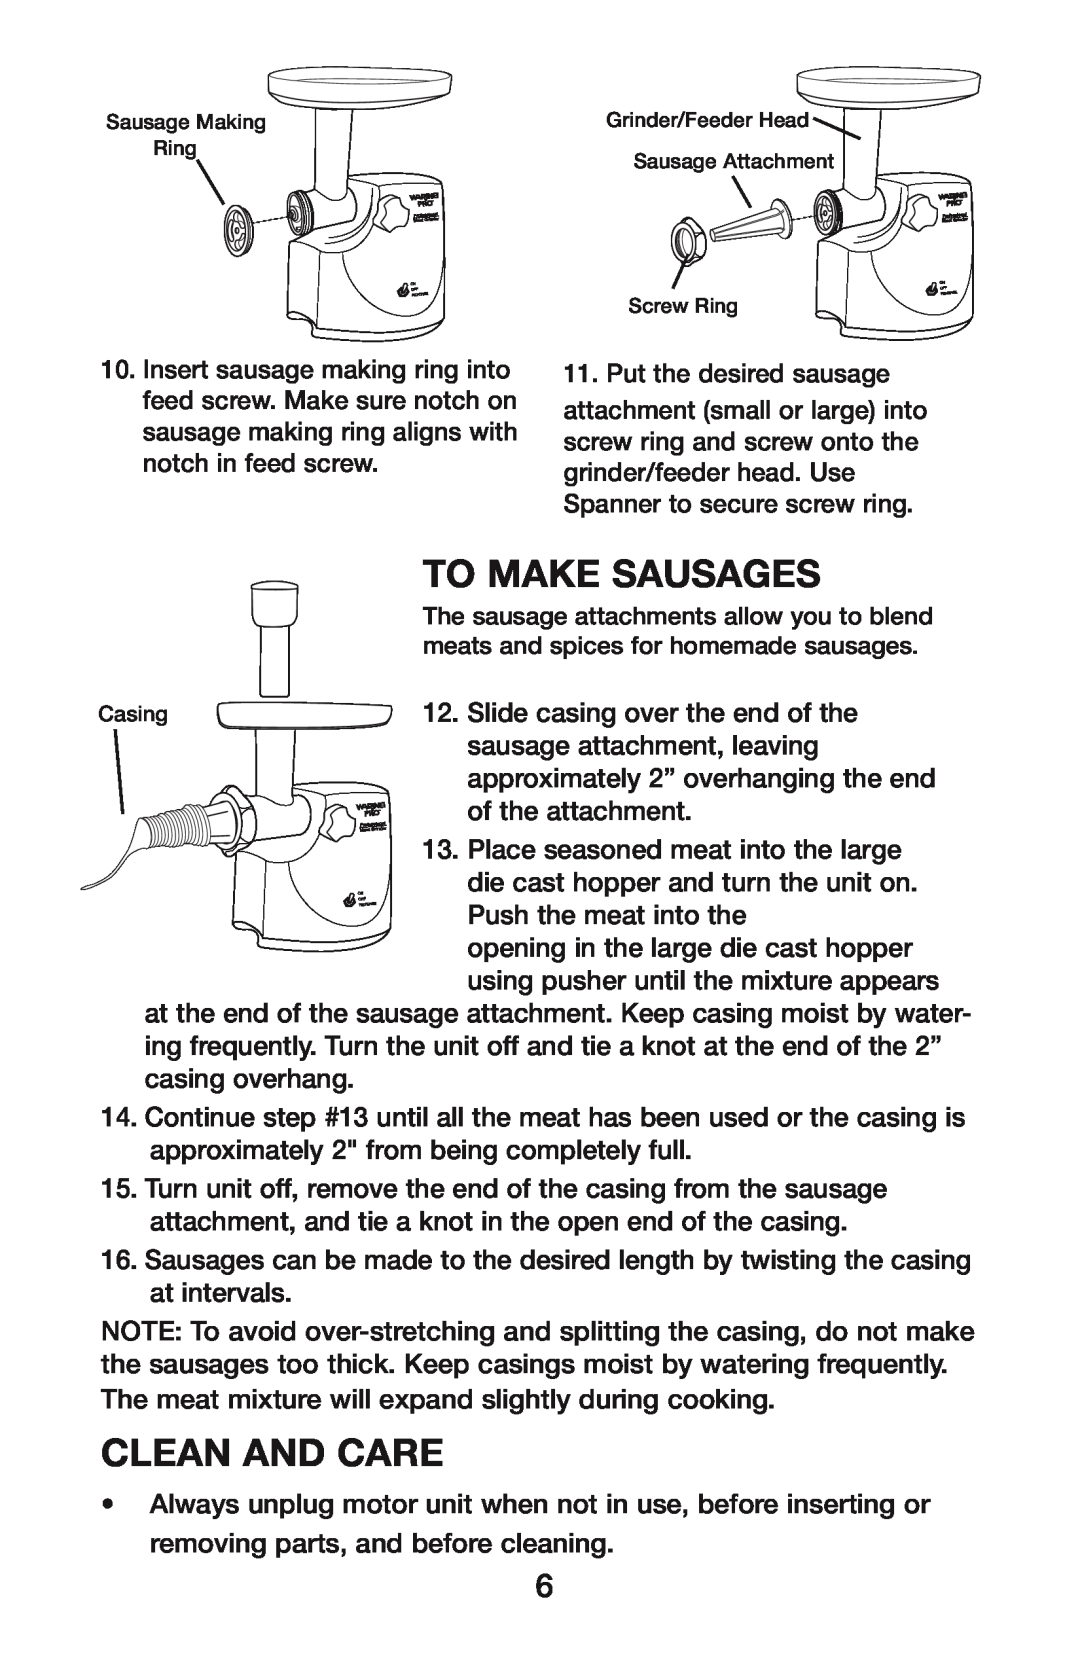 Waring MG800 manual To Make Sausages, Clean And Care 